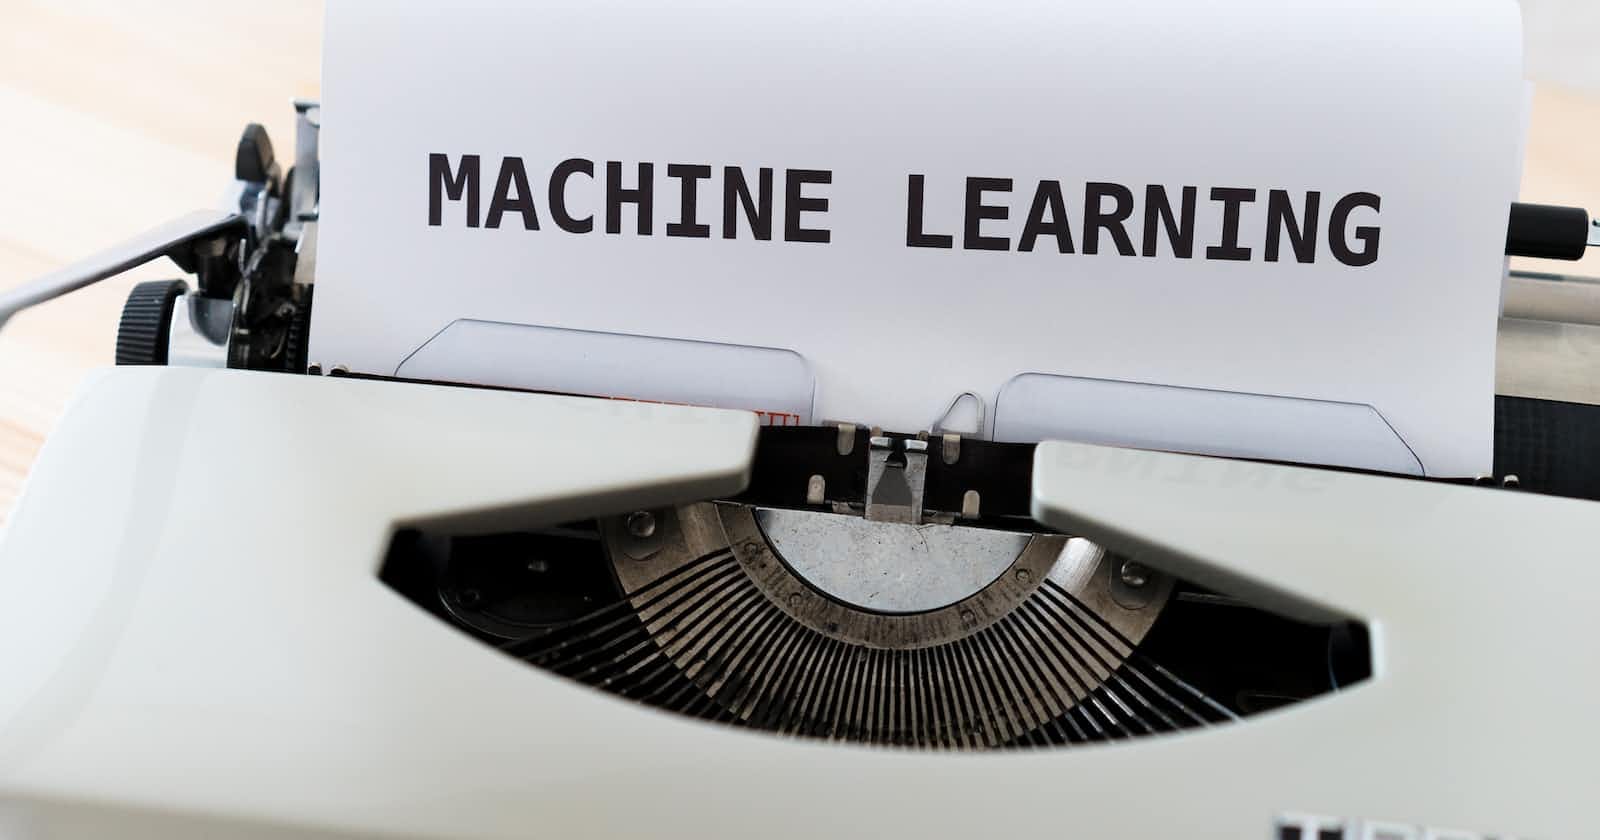 Machine Learning and how to learn it